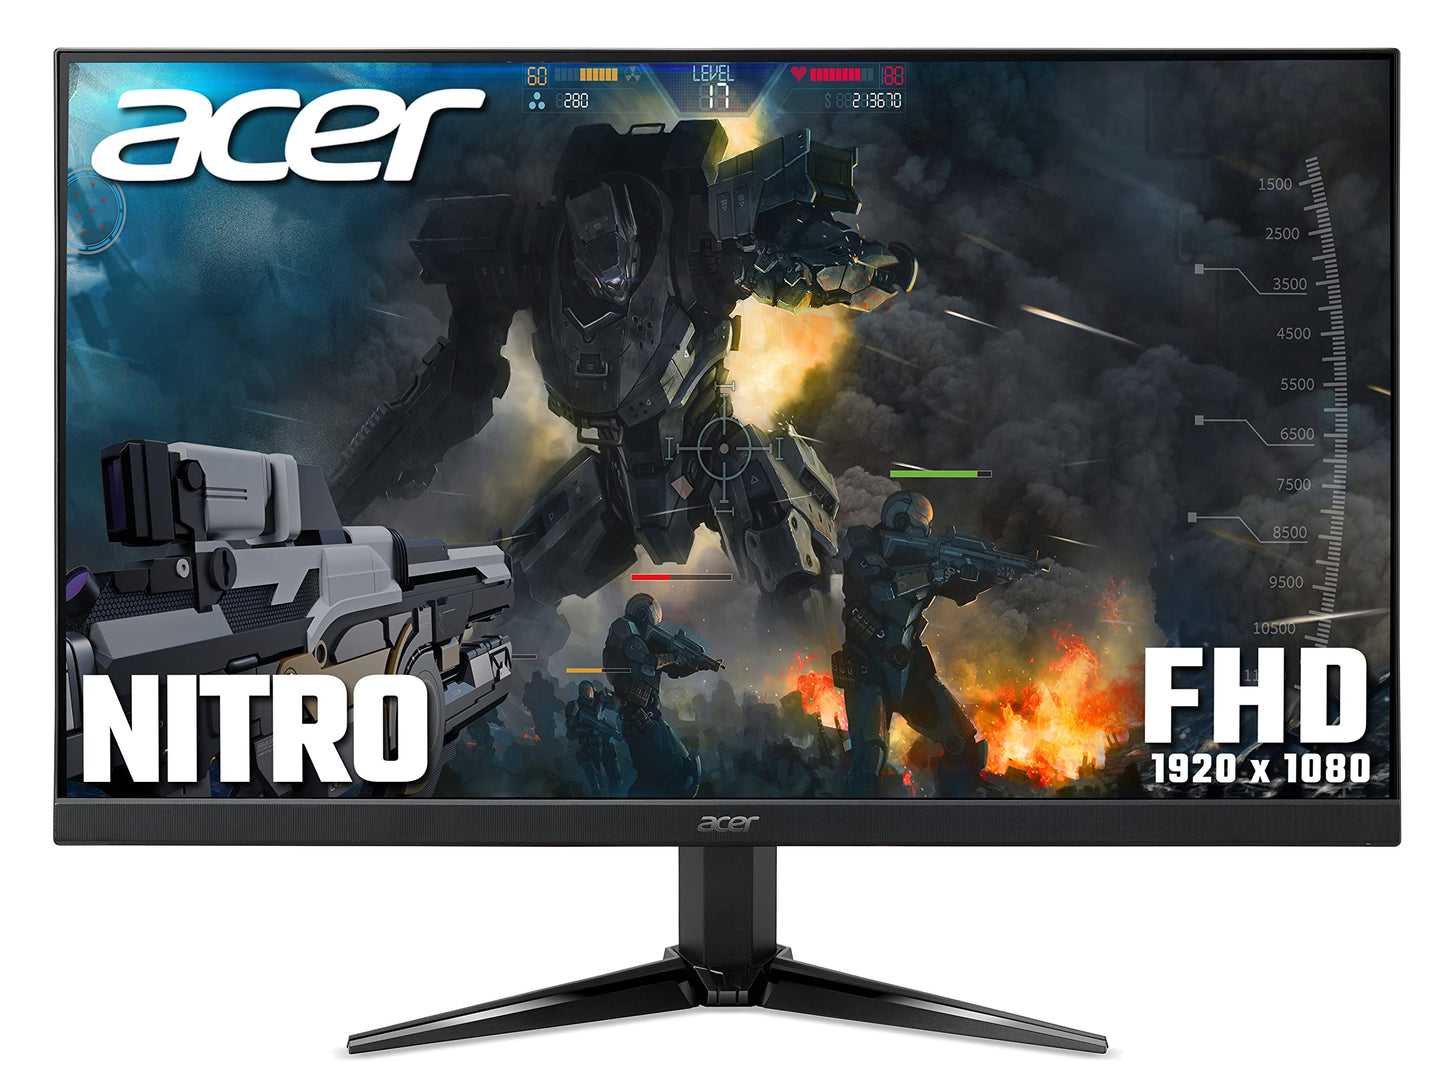 Acer Nitro 23.8 Inch Gaming Monitor 75 Hz Full Hd With 1 Ms Amd Free Sync Recommended For Work & Play, Black, Qg1 2 Years Warranty (Qg241Y)